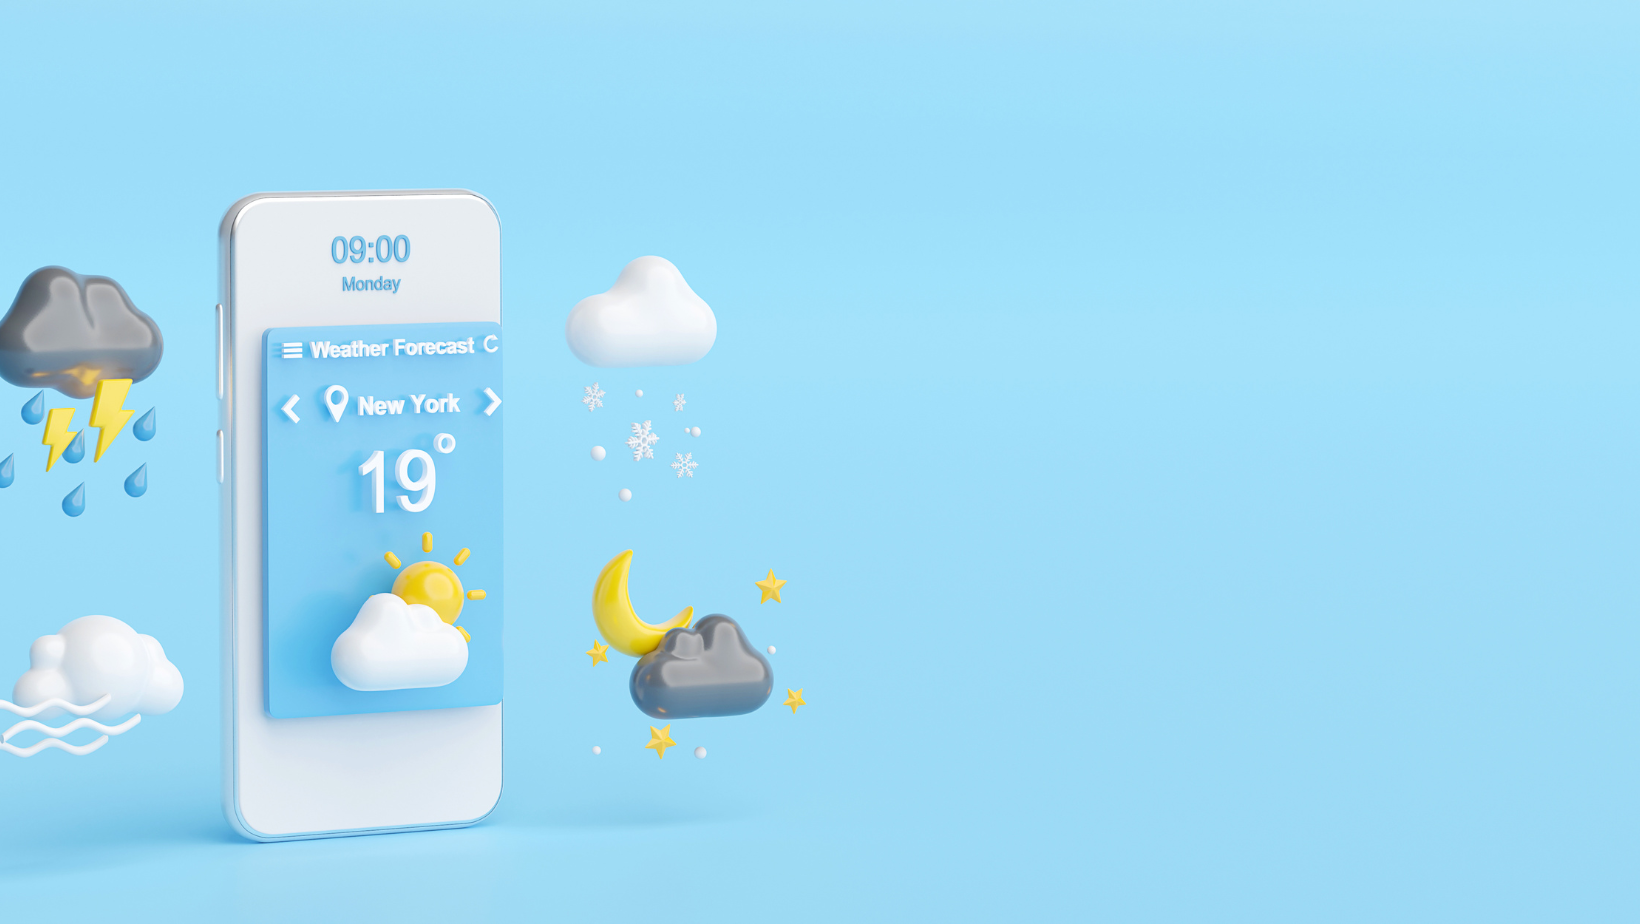 Weatherstack weather app to get historical weather data, weather forecast data through local weather models and weather stations